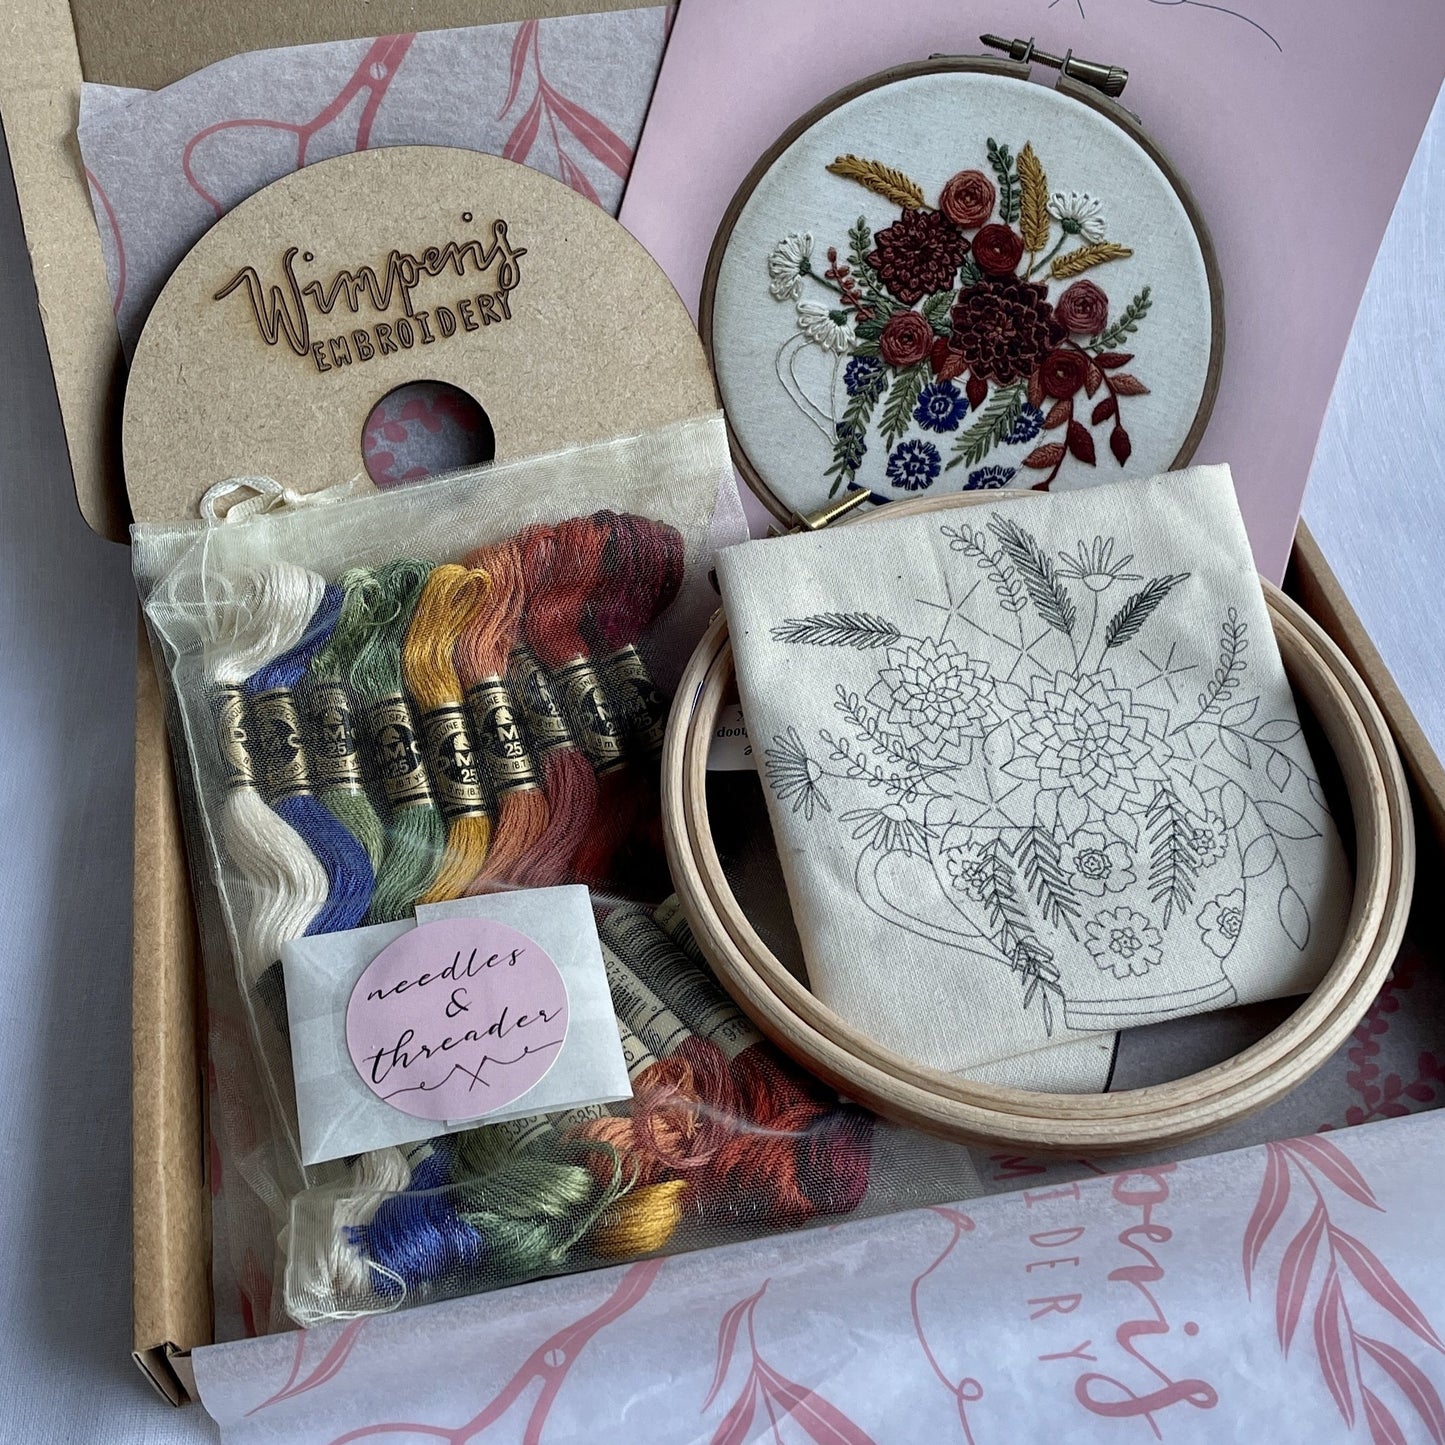 Floral Teacup Embroidery Kit